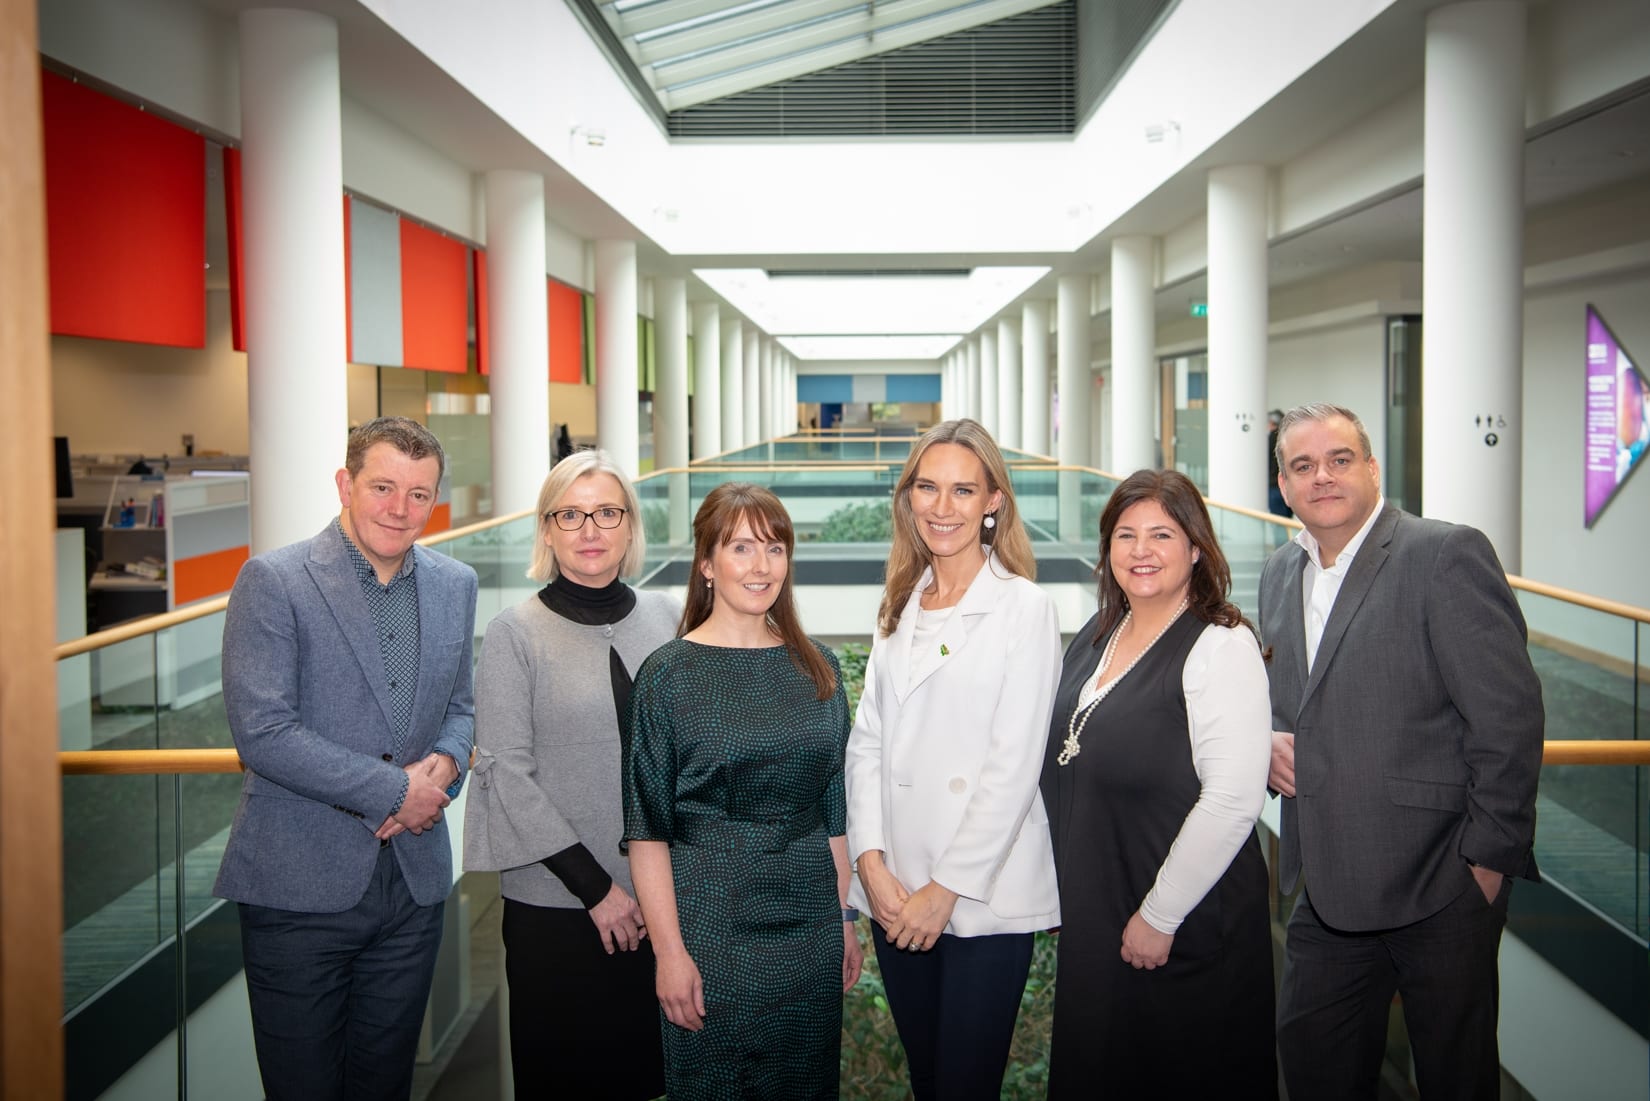 No repro fee- Building your Employer Value Proposition event held in Analog Devices in association with Limerick Chamber on Wednesday 22nd January 2020  - From Left to Right: Graham Burns - CPL, Judy Tighe - Speaker / AIB, Fiona Keogh - Speaker / Analog Devices International, Dee Ryan - CEO Limerick Chamber, Jemma Carty - Speaker / DELL Technologies, Noel Gavin - Speaker / Northern Trust. 
Photo credit Shauna Kennedy